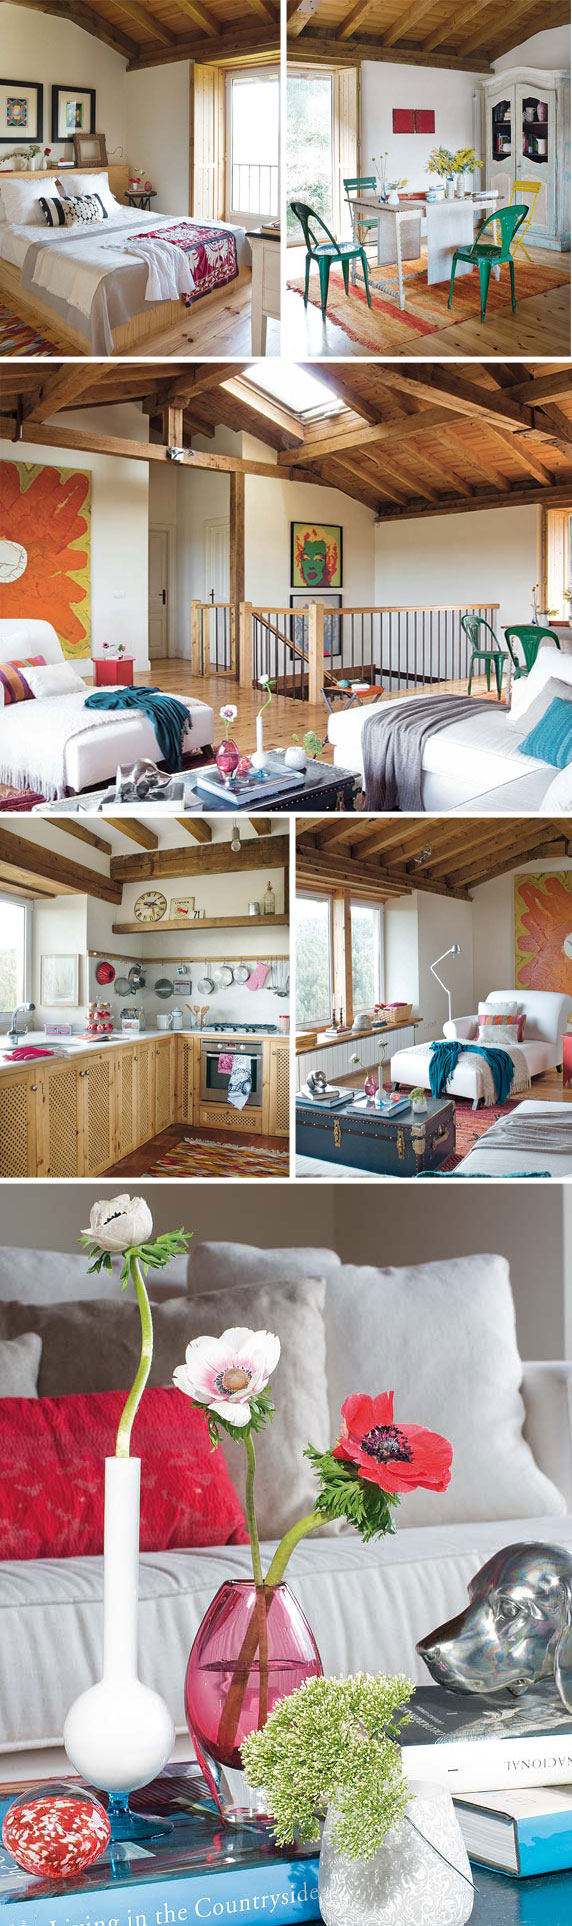 summer cottage decorating ideas colors wood 2 Summer Cottage Decorating Ideas: colors and wood